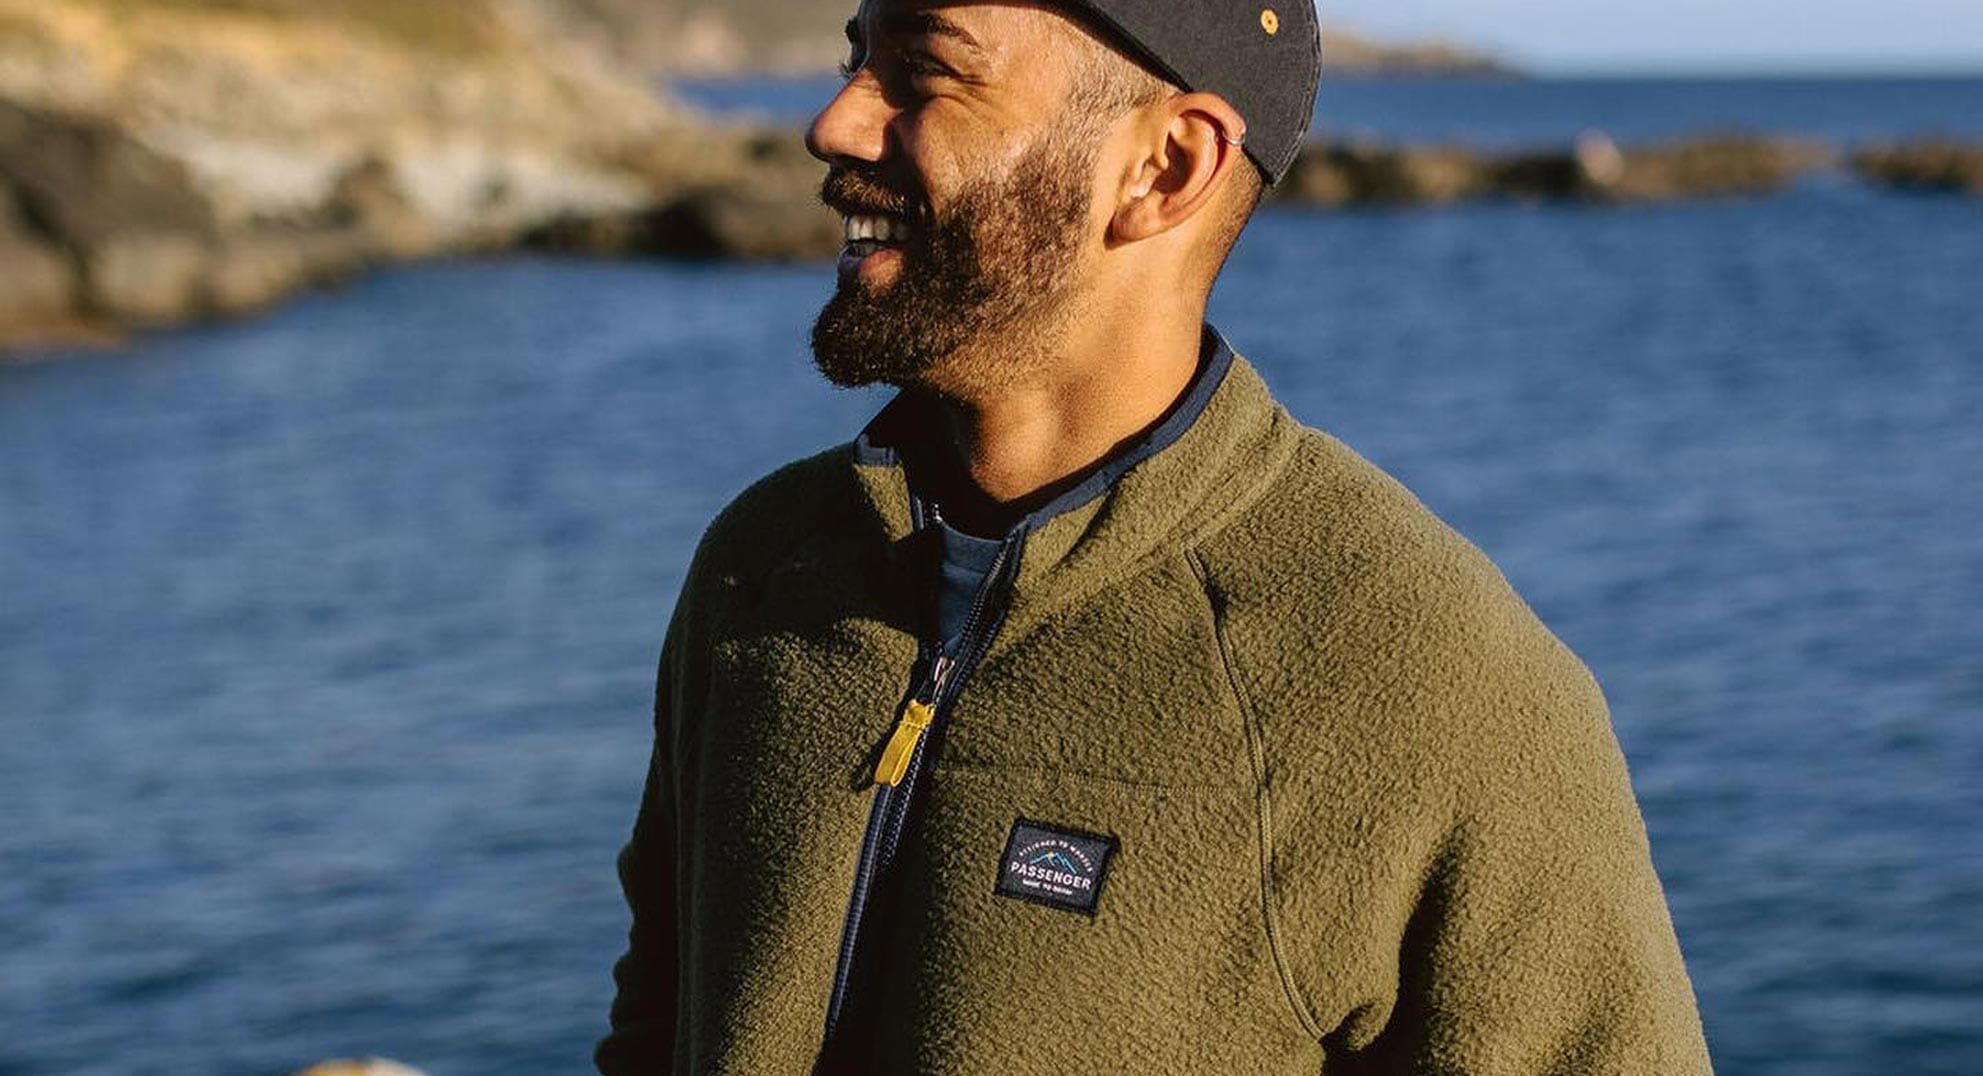 The best brands like Patagonia for A+ outdoor style | OPUMO Magazine